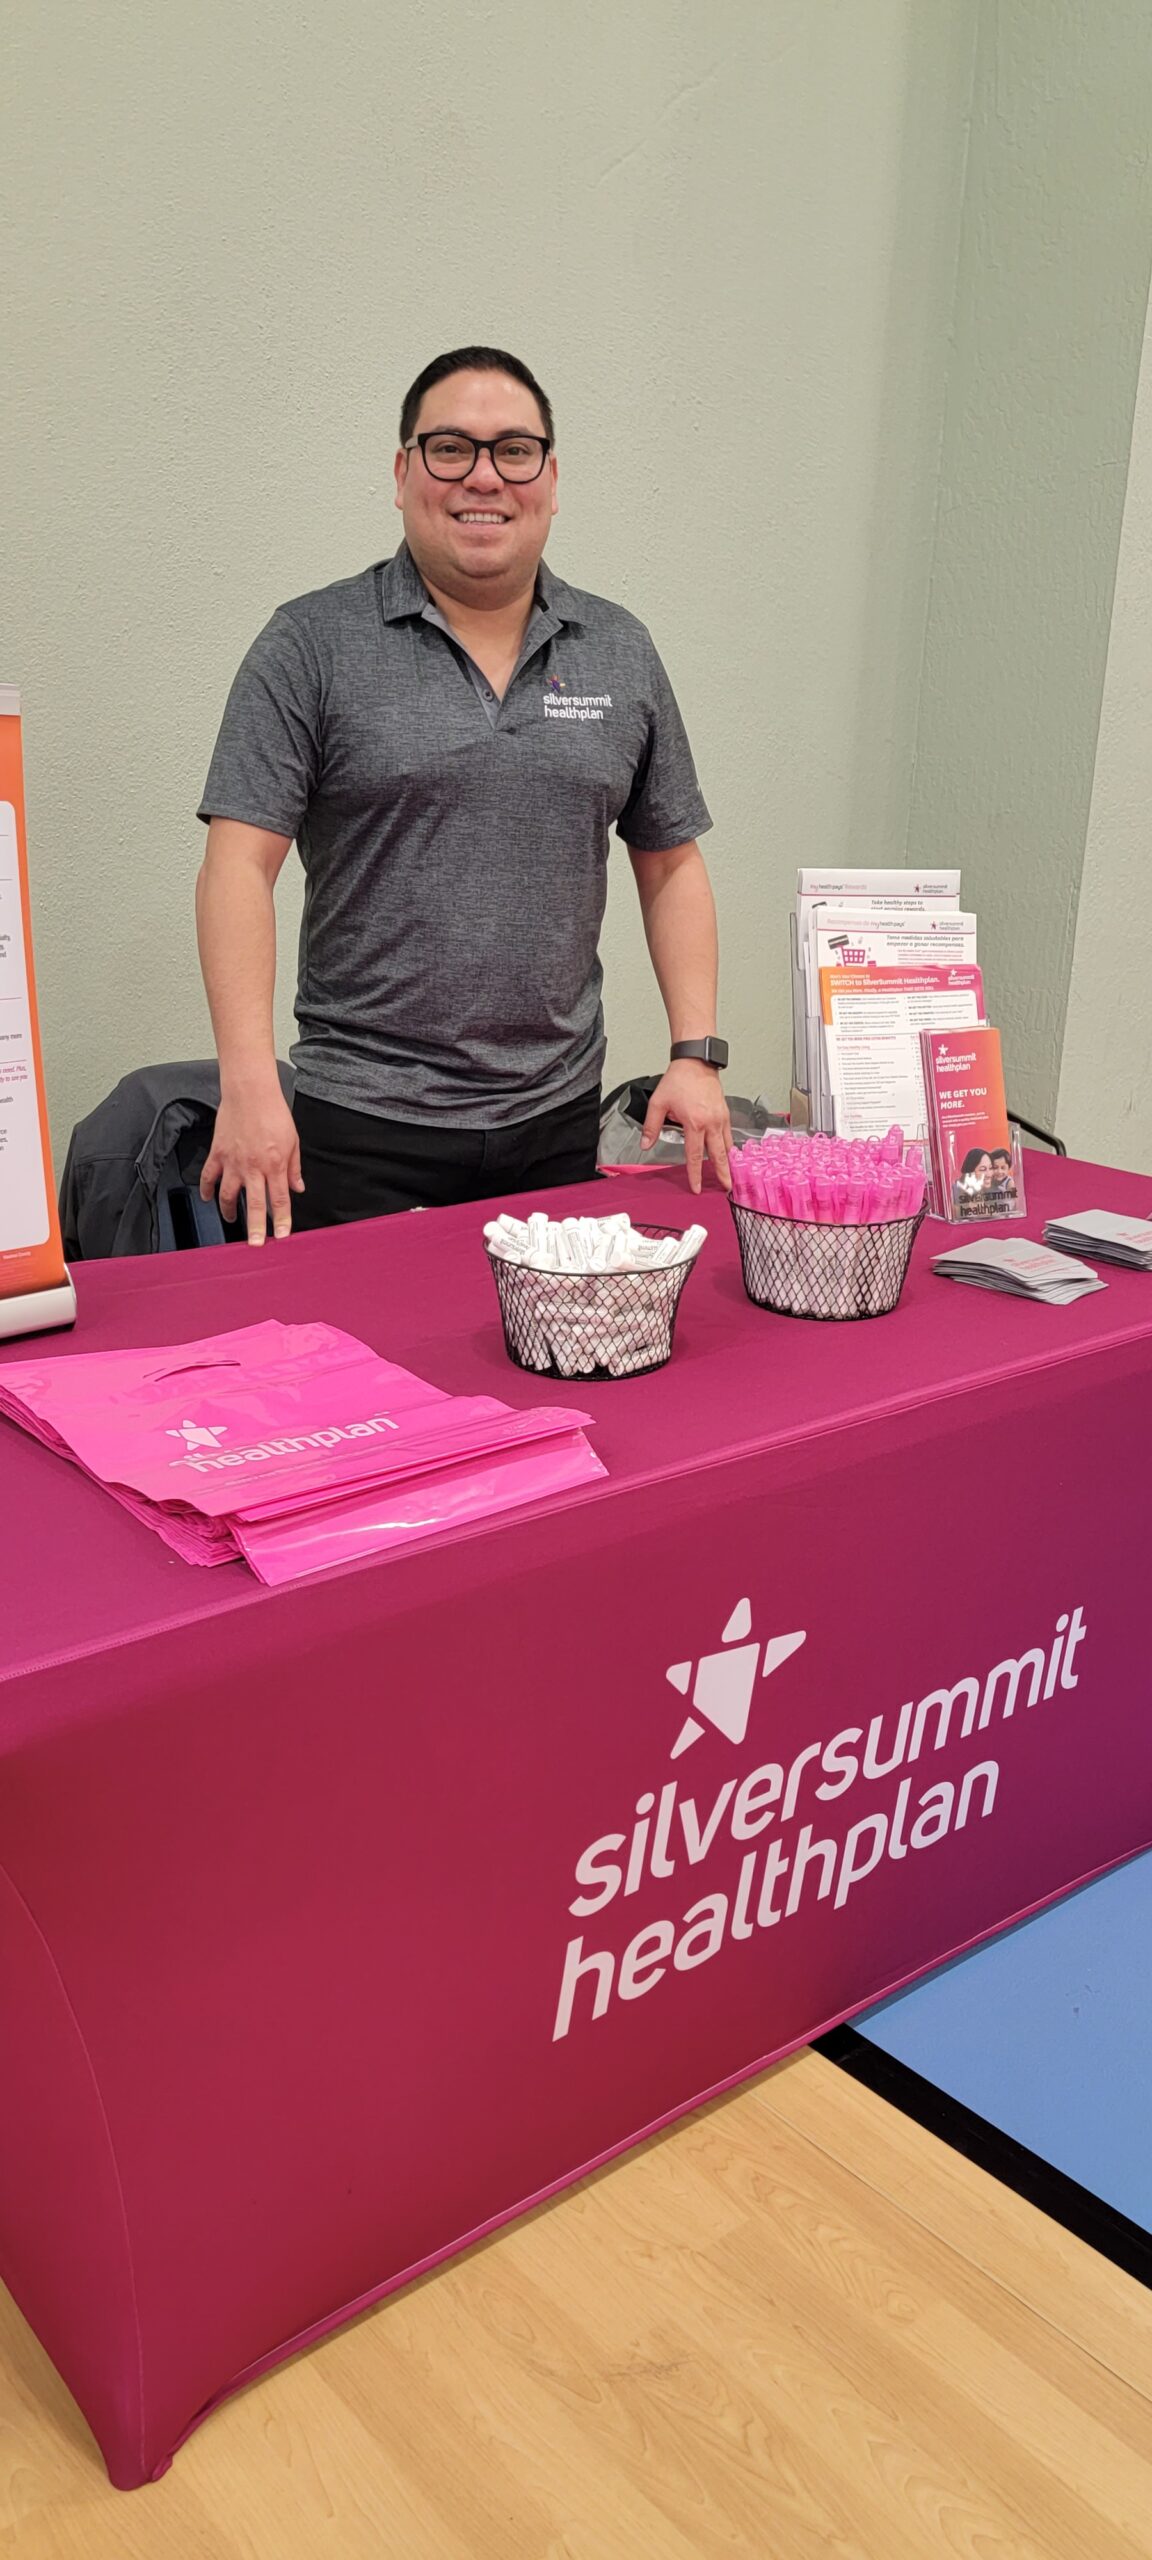 A man standing in front of a table with a silver summit healthcare plan sign.